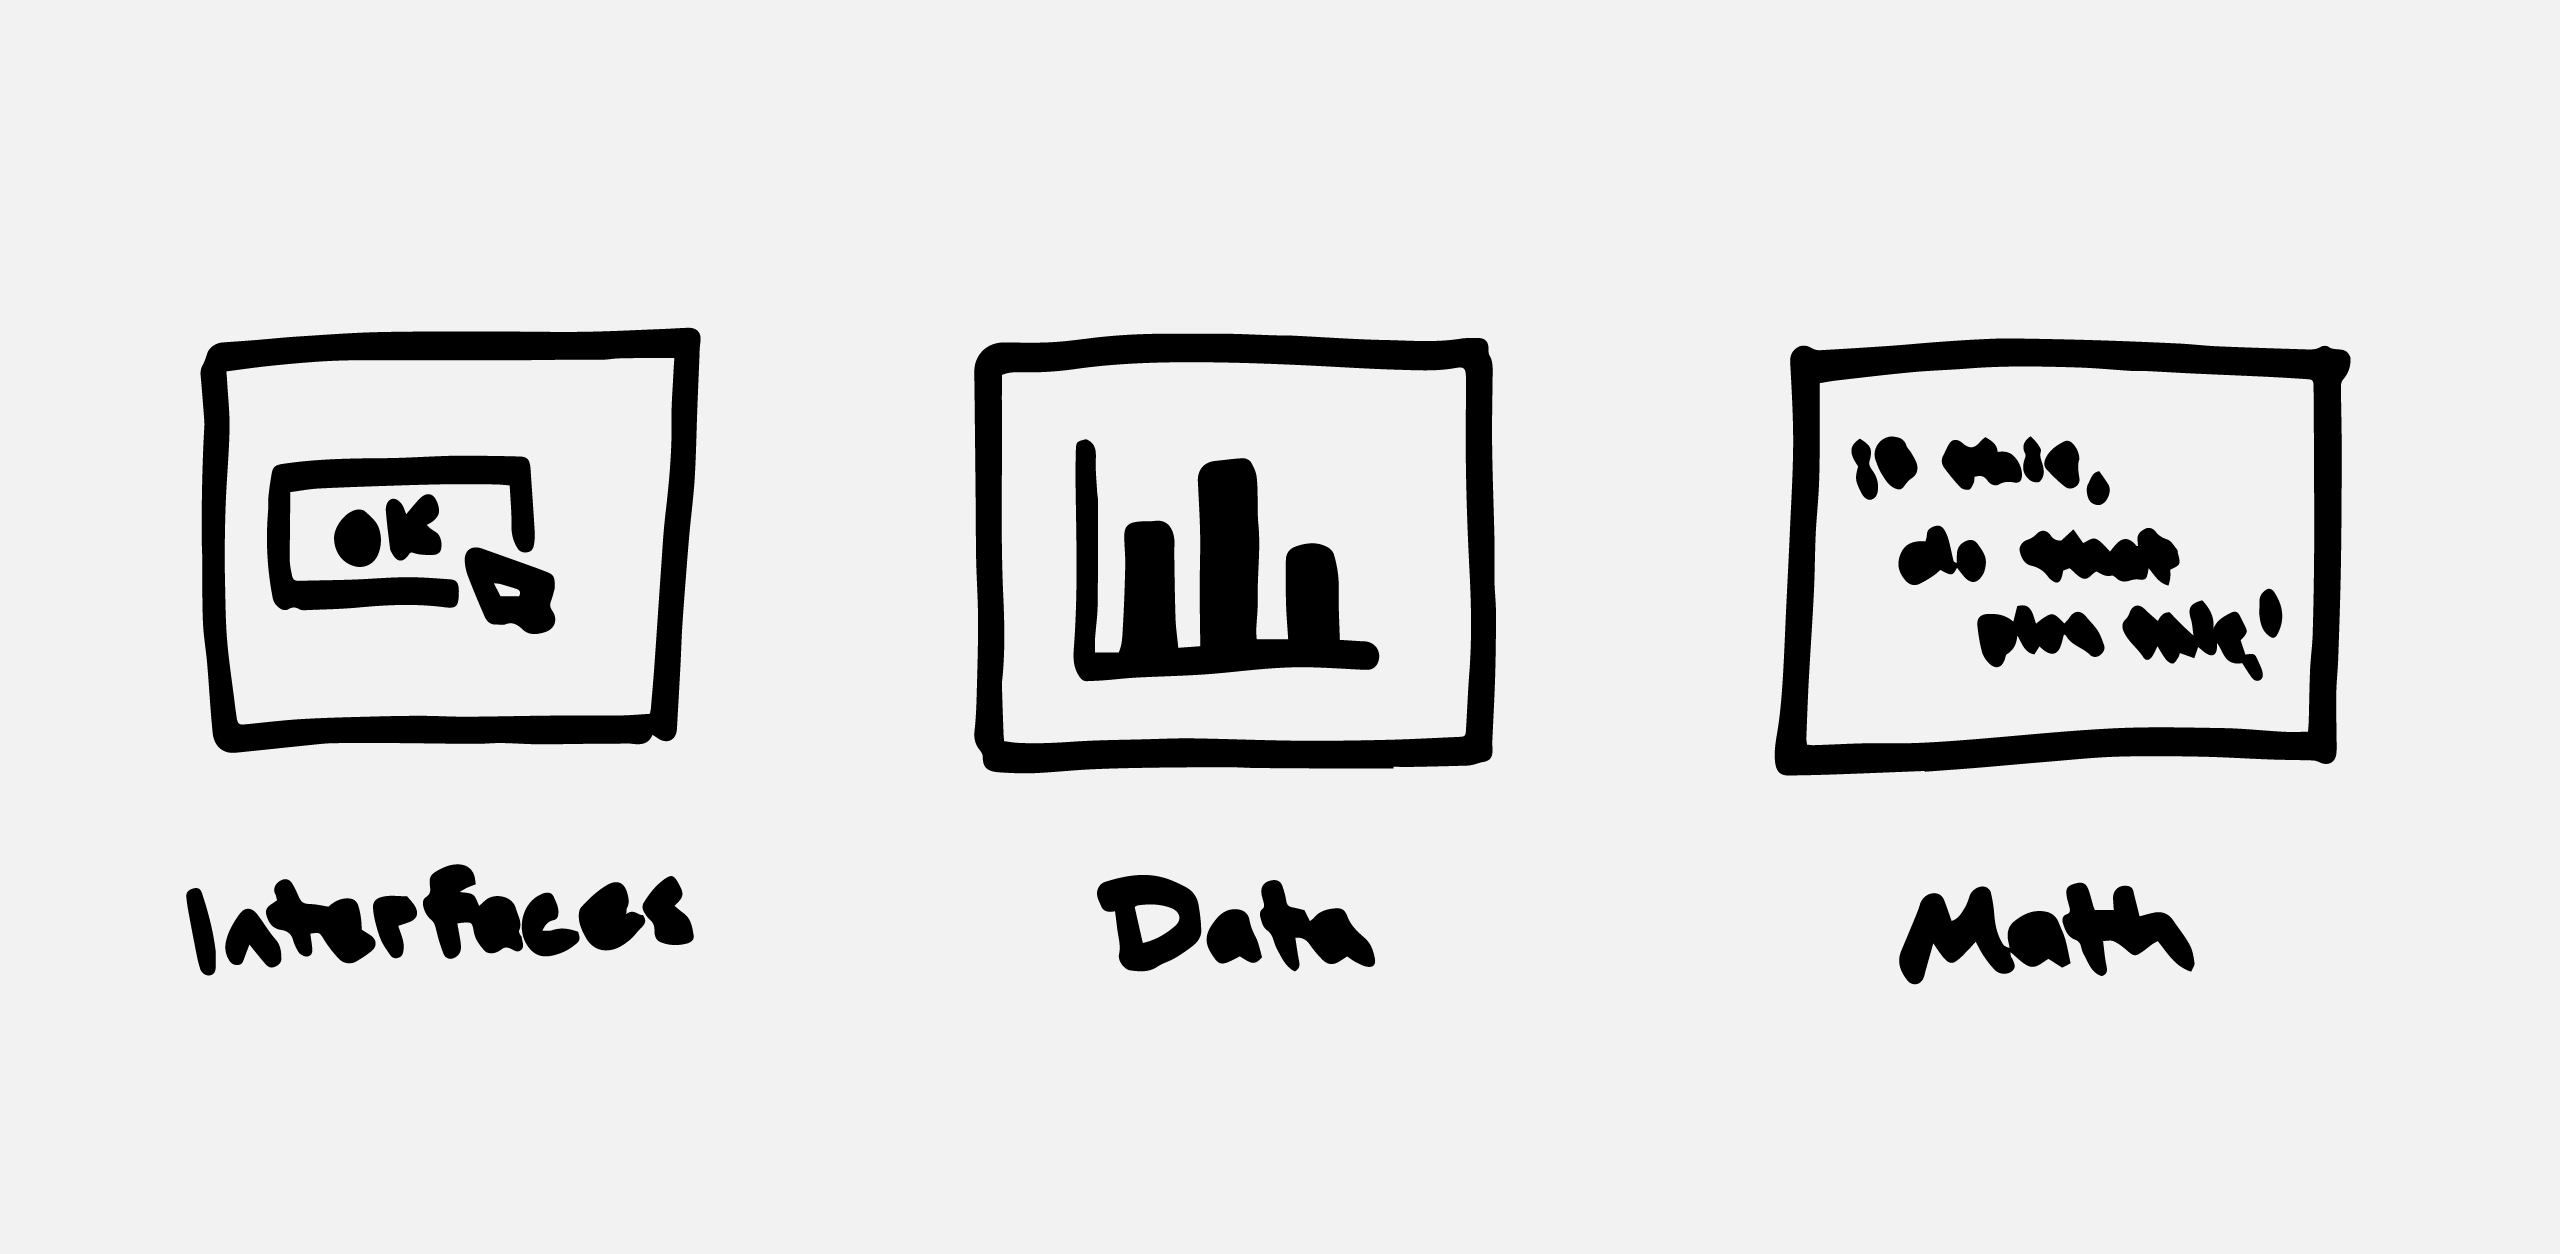 Three square hand-drawn icons illustrating each category, titled “Interfaces”, “Data”, and “Math”.